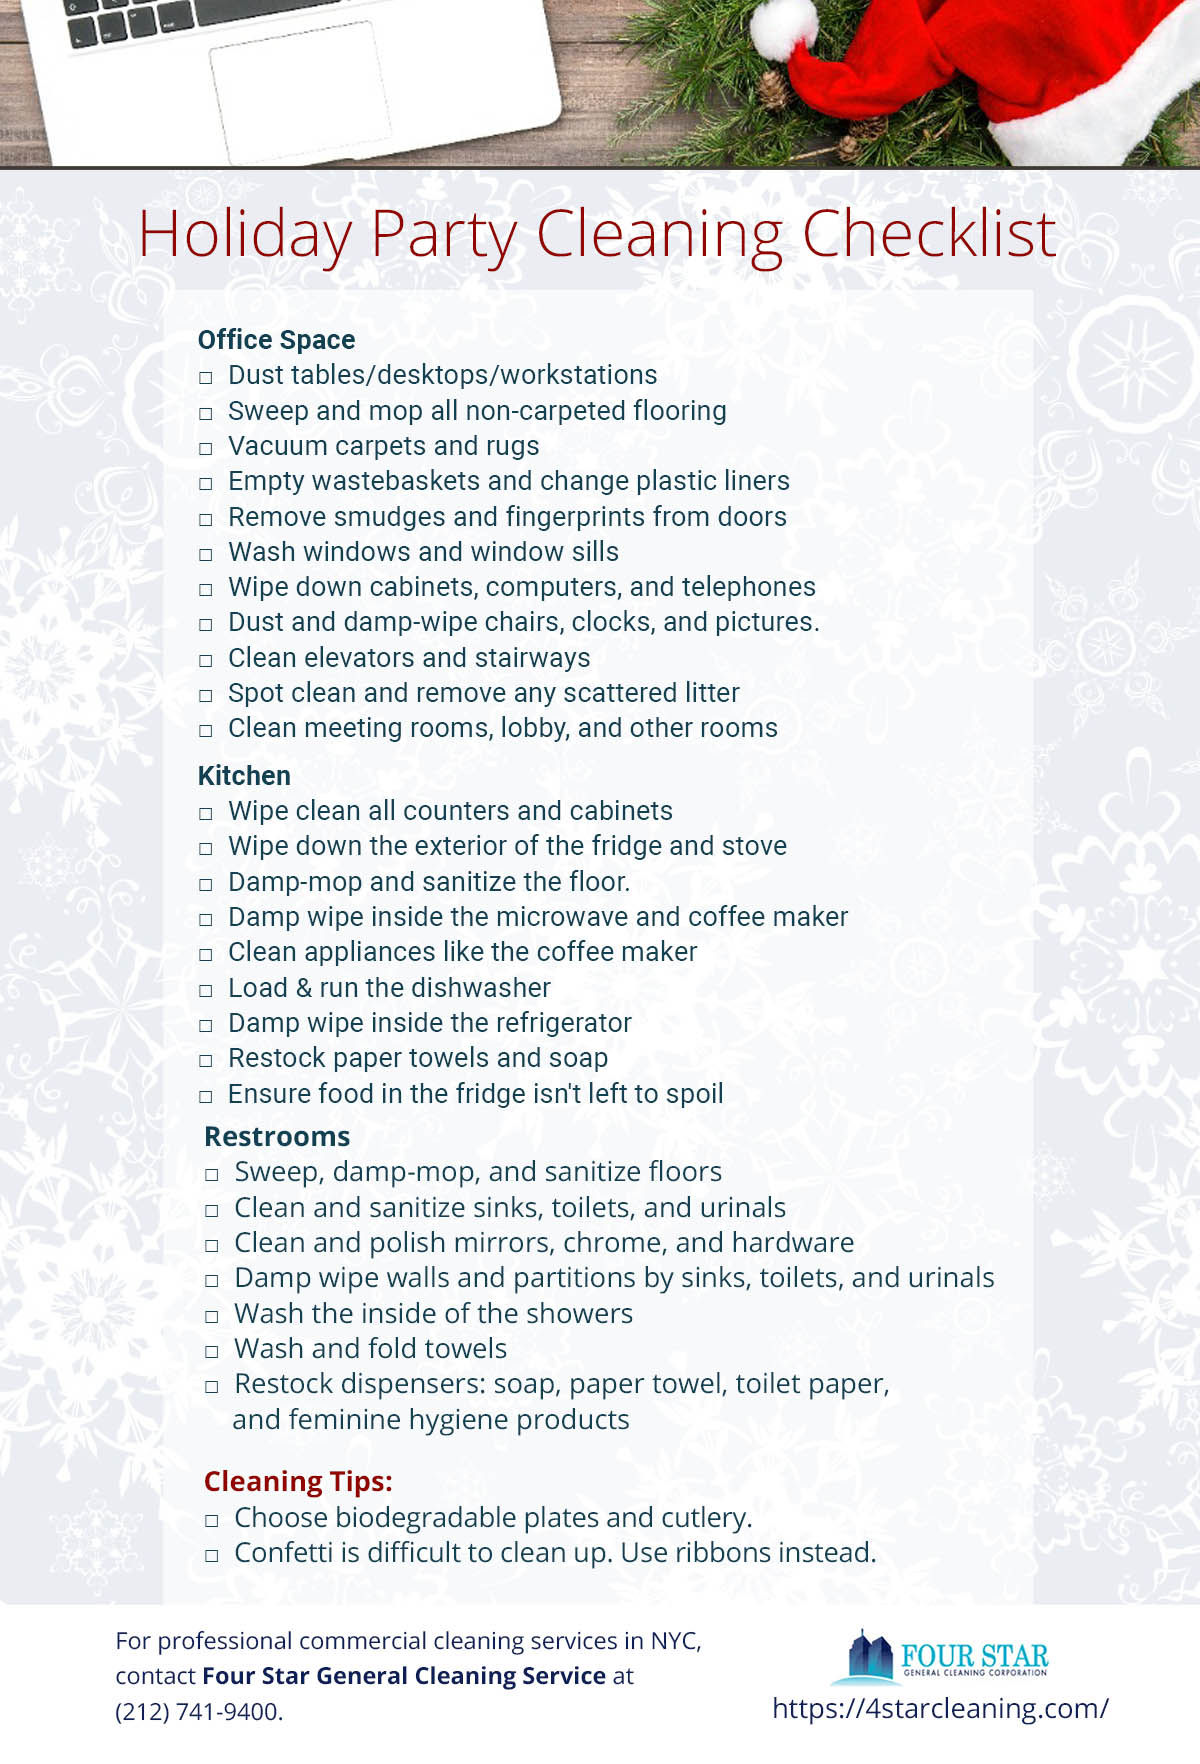 Holiday Party Office Cleaning Checklist